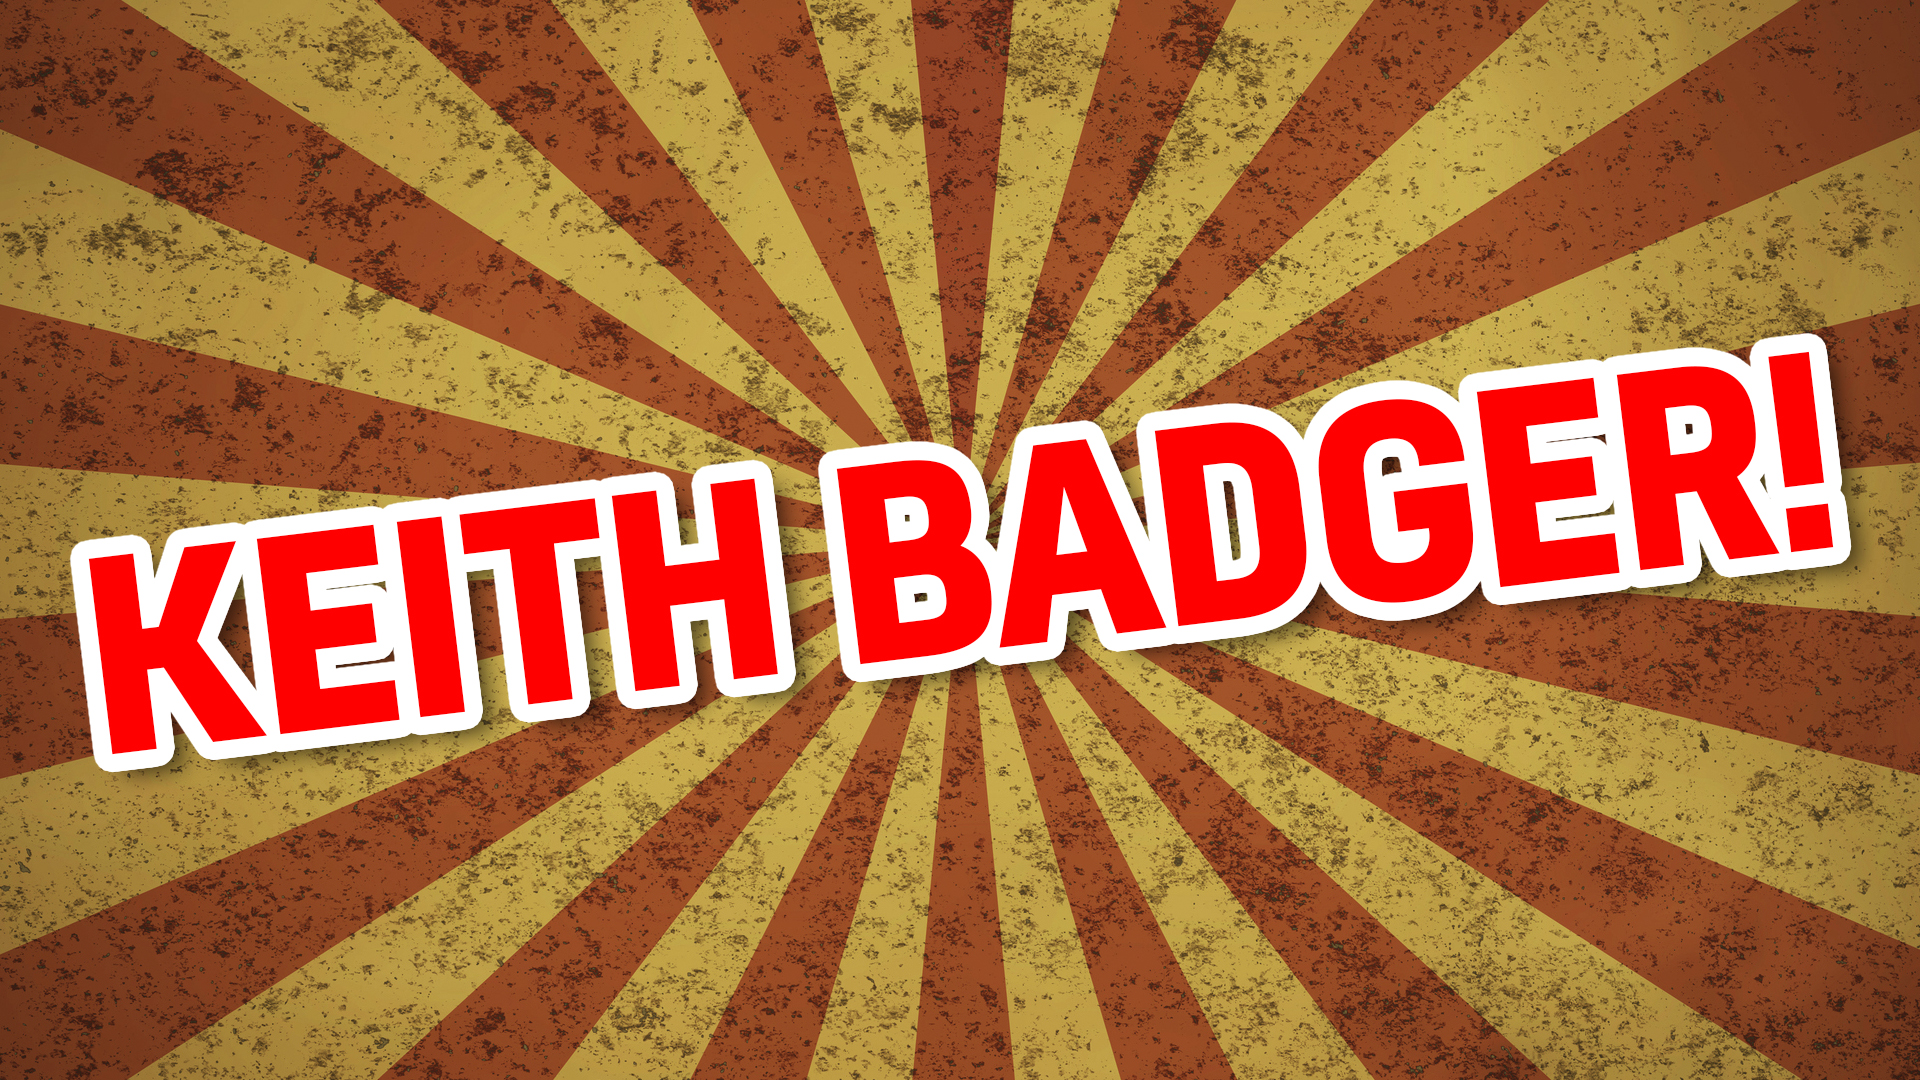 Your name is: KEITH BADGER!